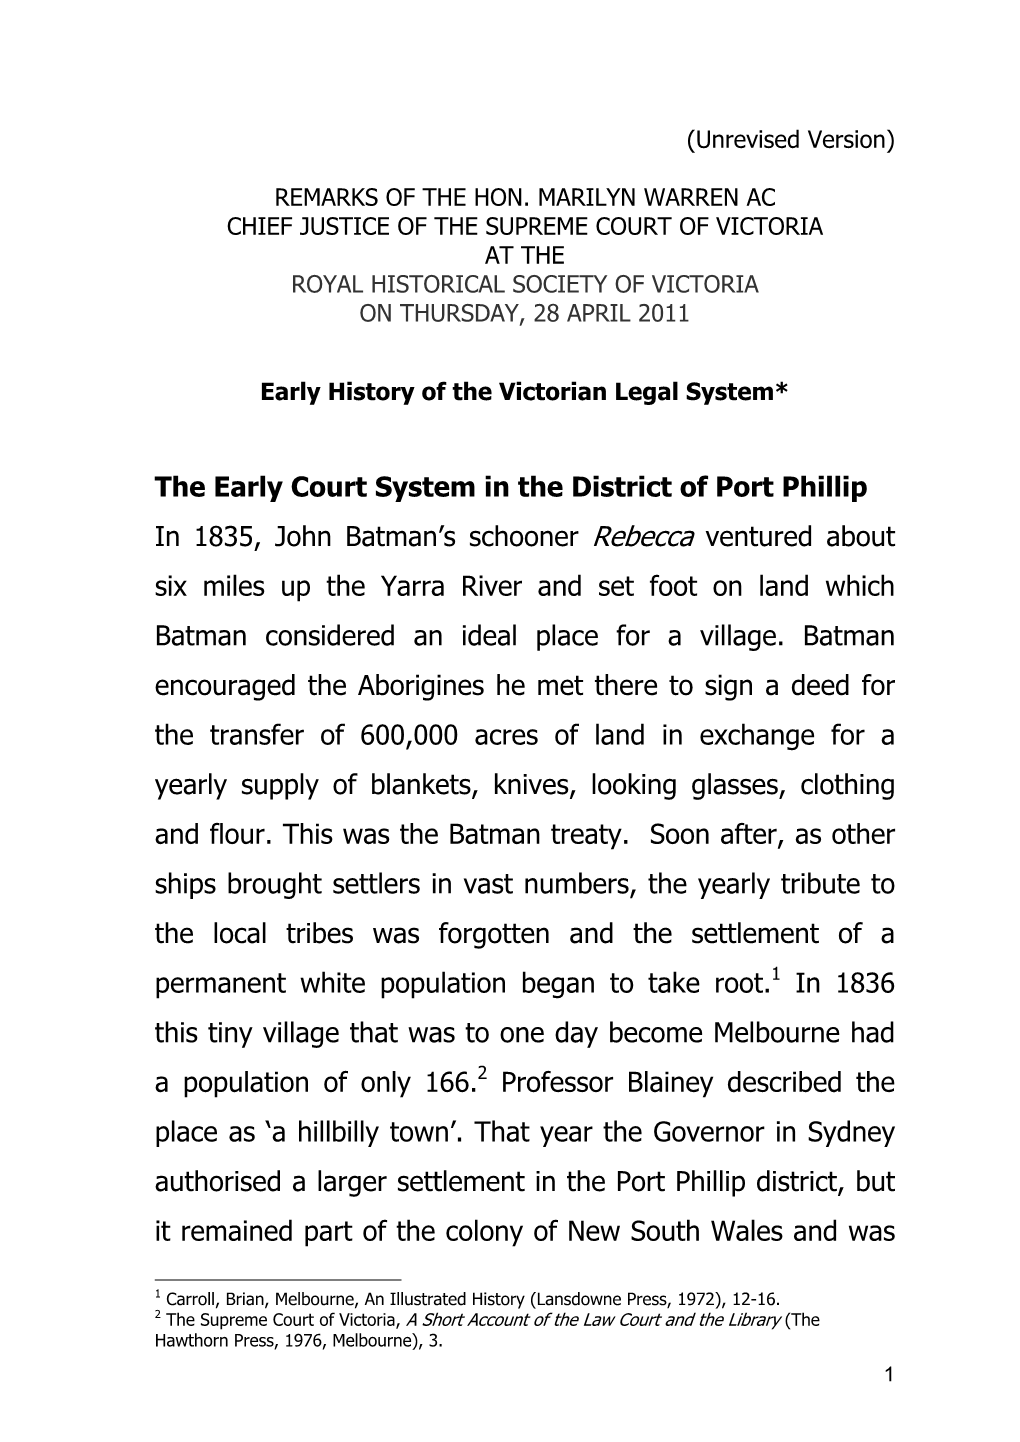 The Early Court System in the District of Port Phillip in 1835, John